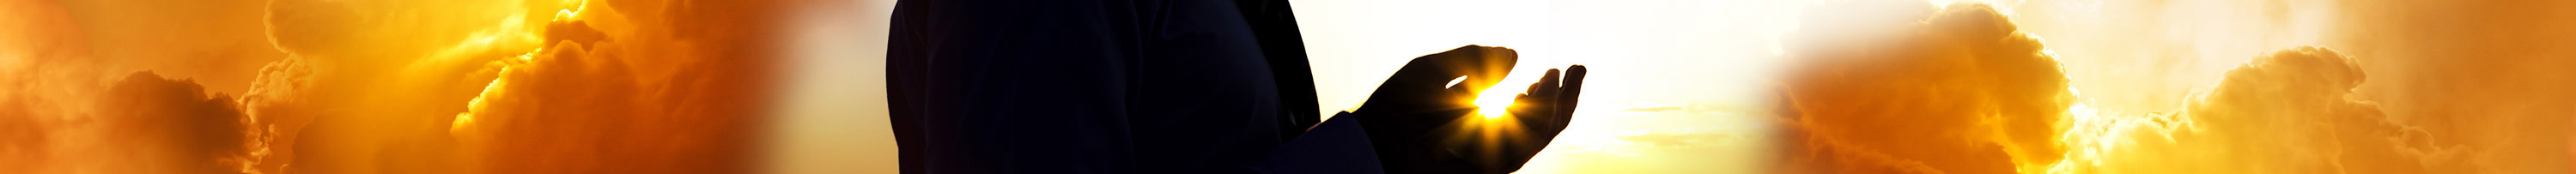 Content restricted Banner